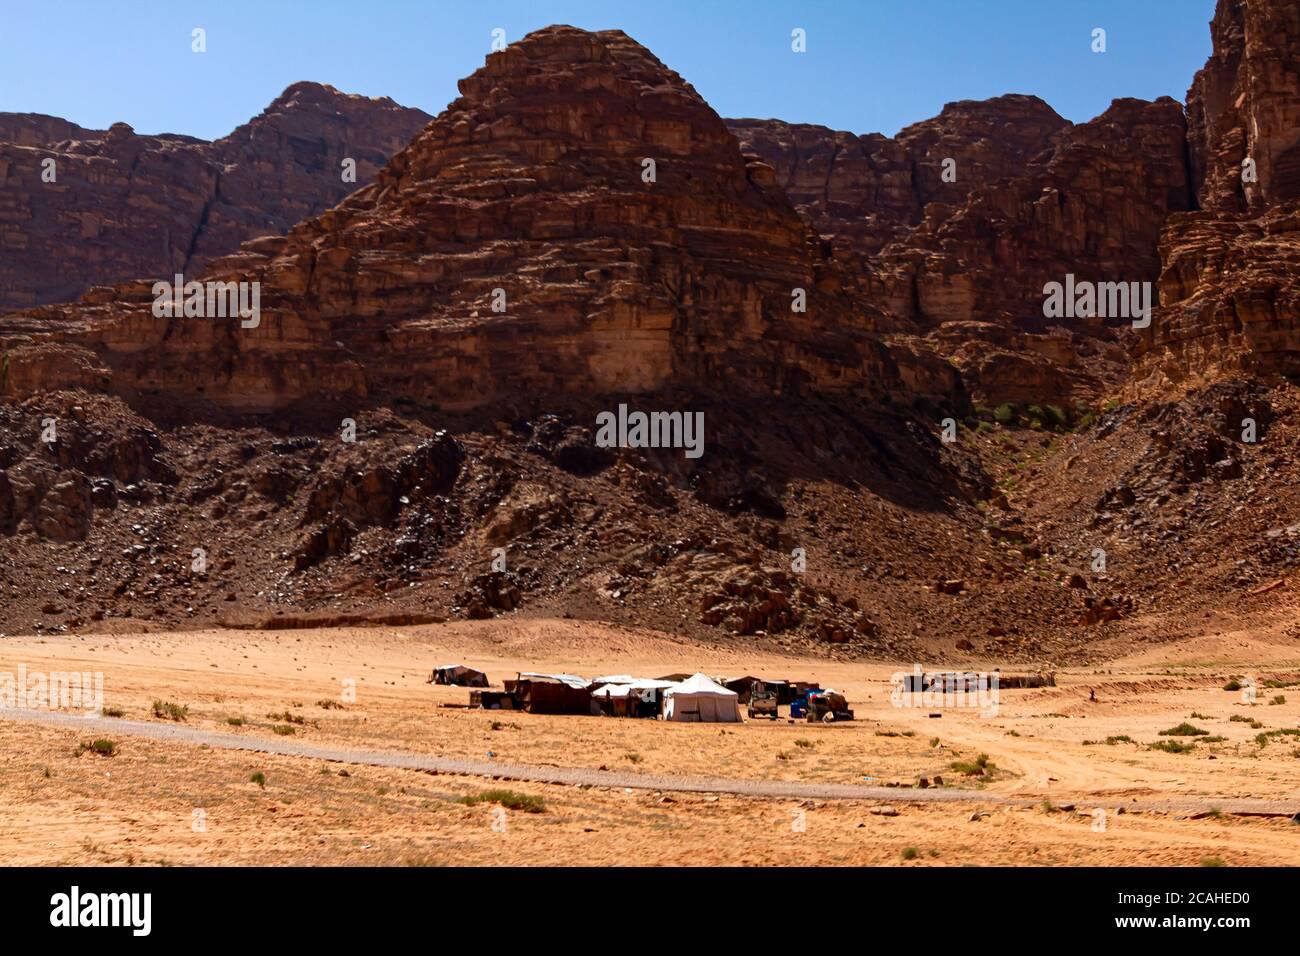 A small group of Bedouin tents established at a remote location on sands of Wadi Rum Desert. Image features tents, shades and off road vehicles on the Stock Photo